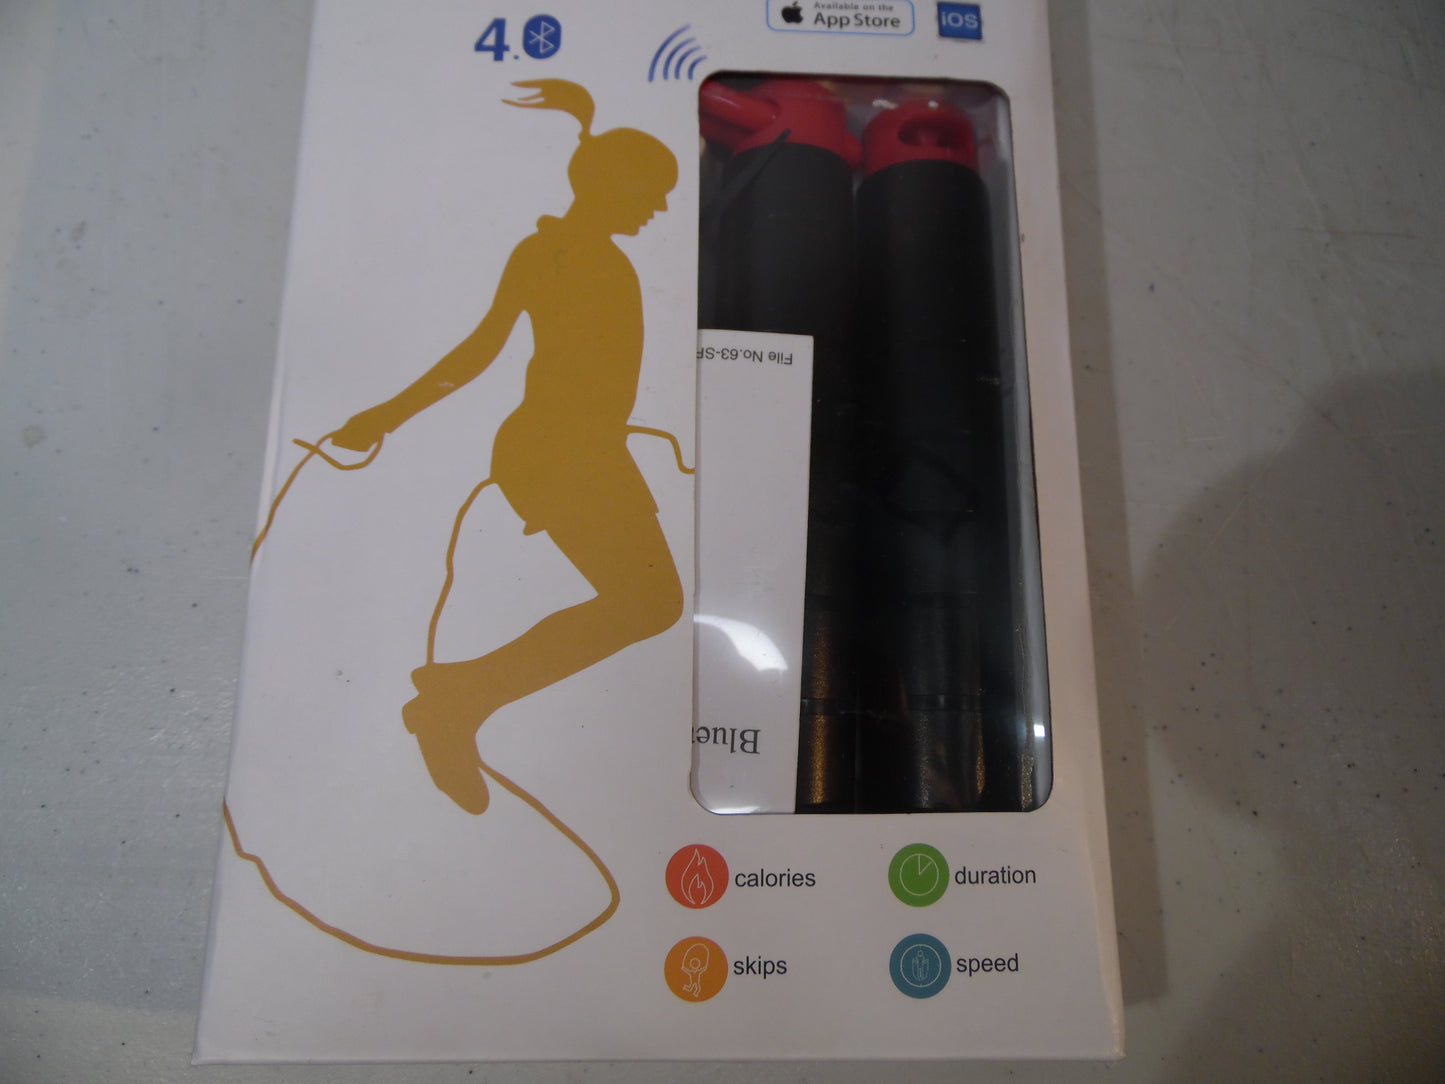 Waterproof Portable S7 Wireless Skipping Rope 4.0 Smart Skipping Jump Rope With APP To Monitor Track Skipping Mode